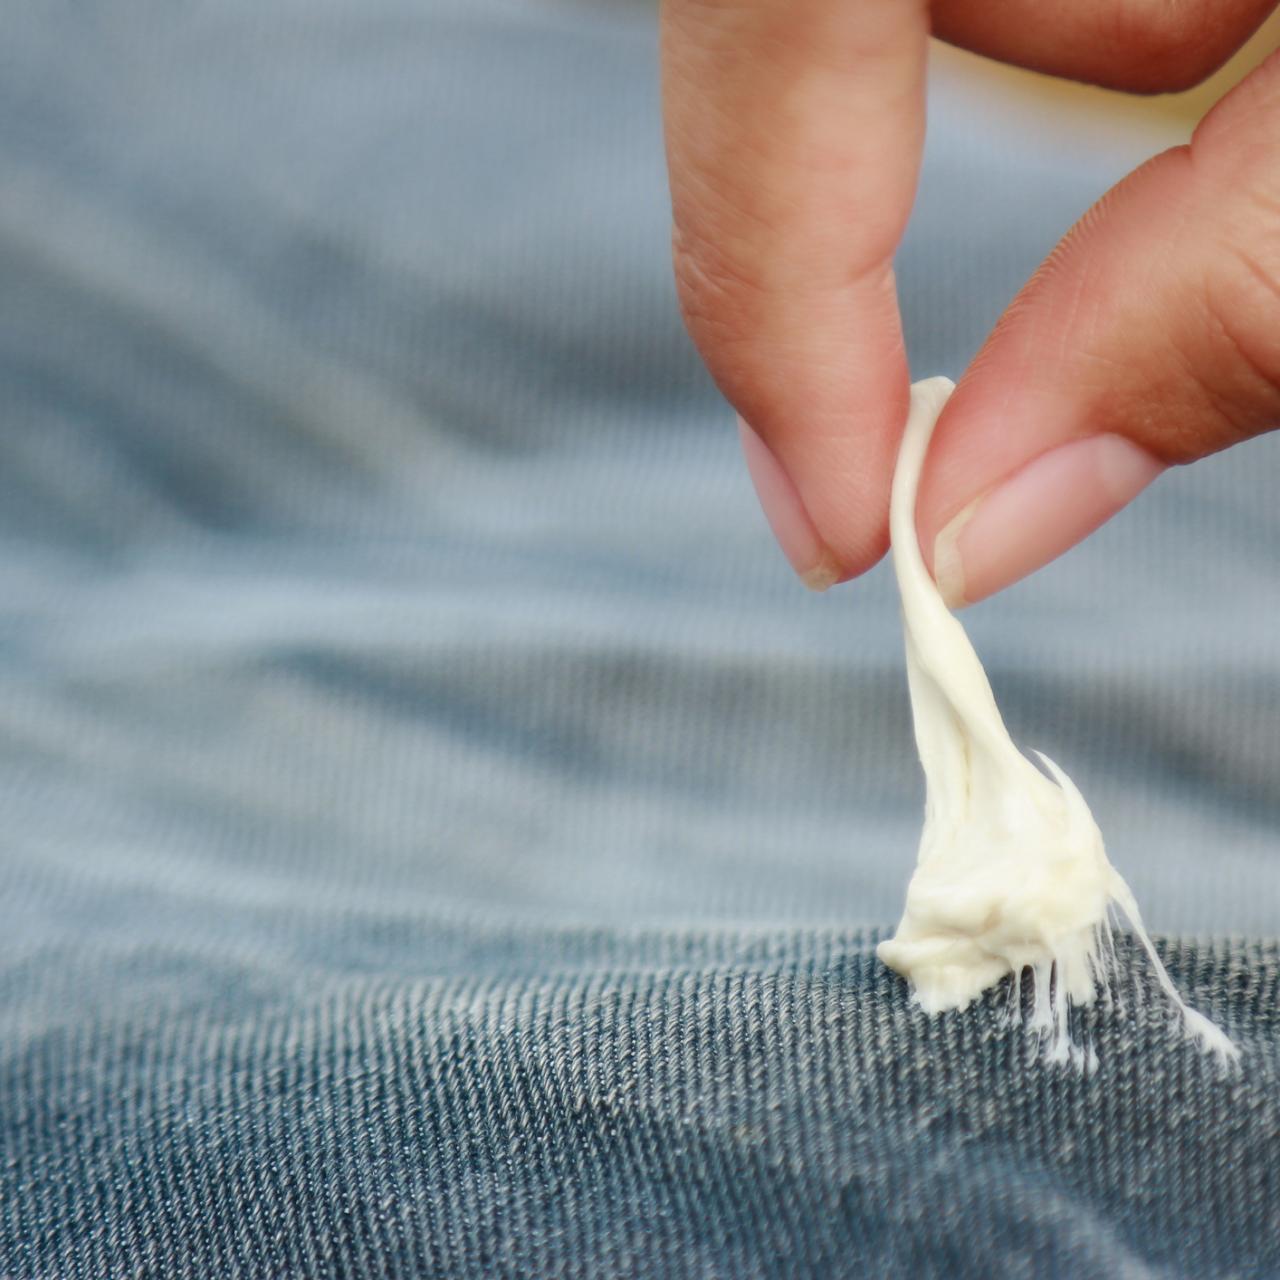 5 Ways To Remove Gum From Clothing Hgtv